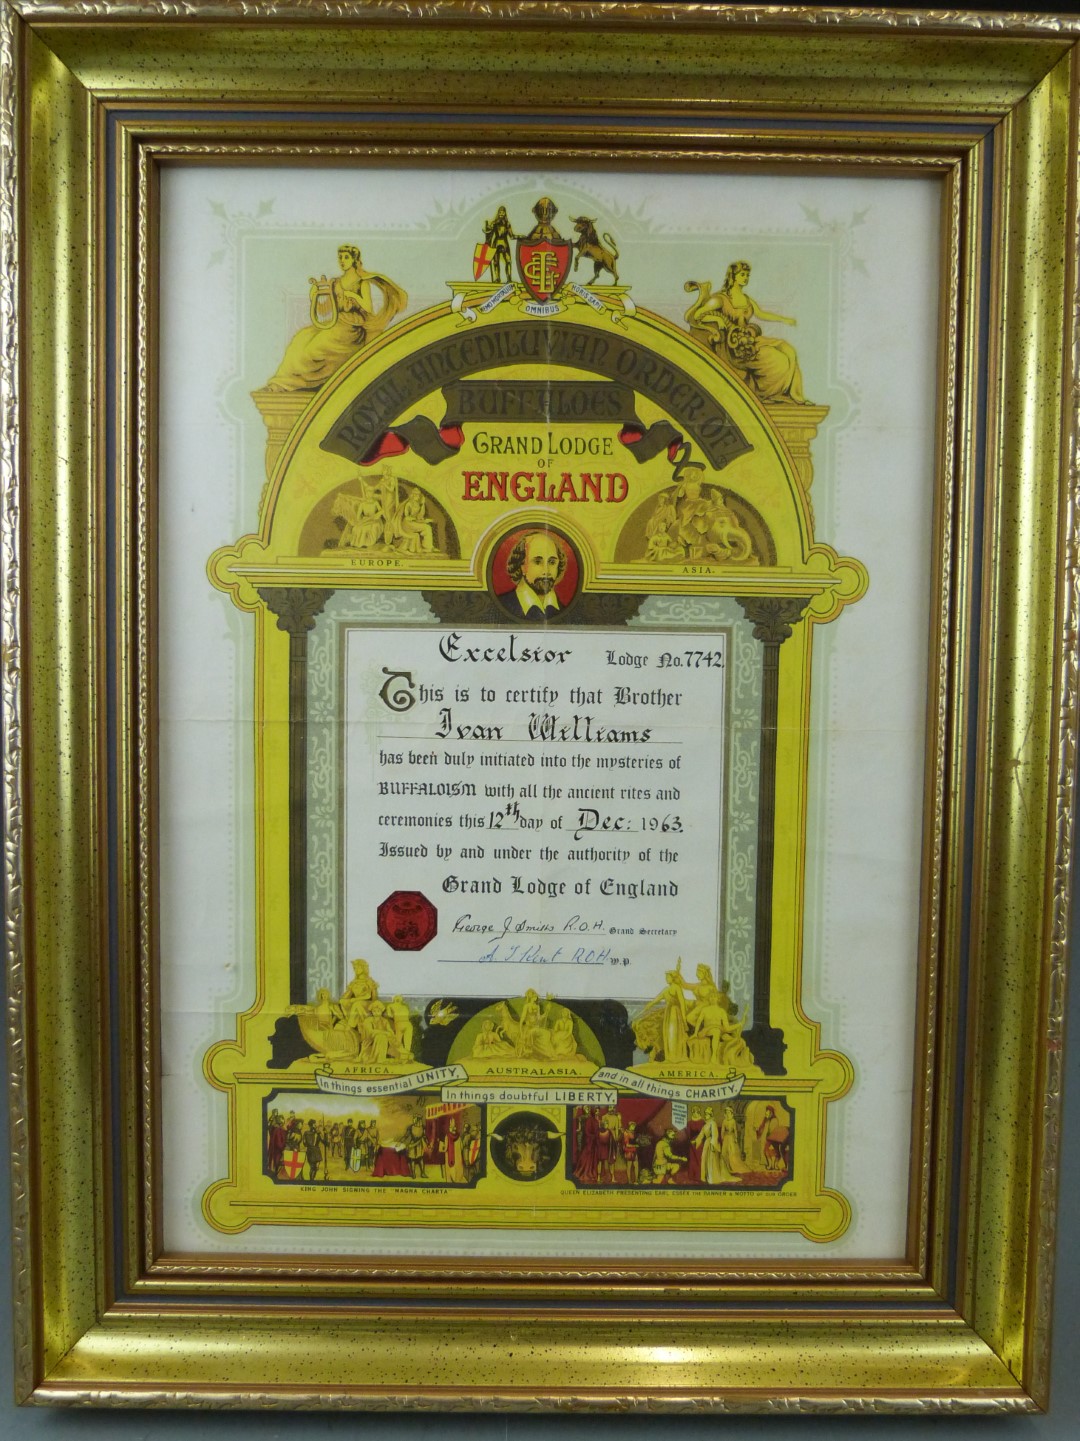 RAOB ephemera and medals including a hallmarked silver gilt example